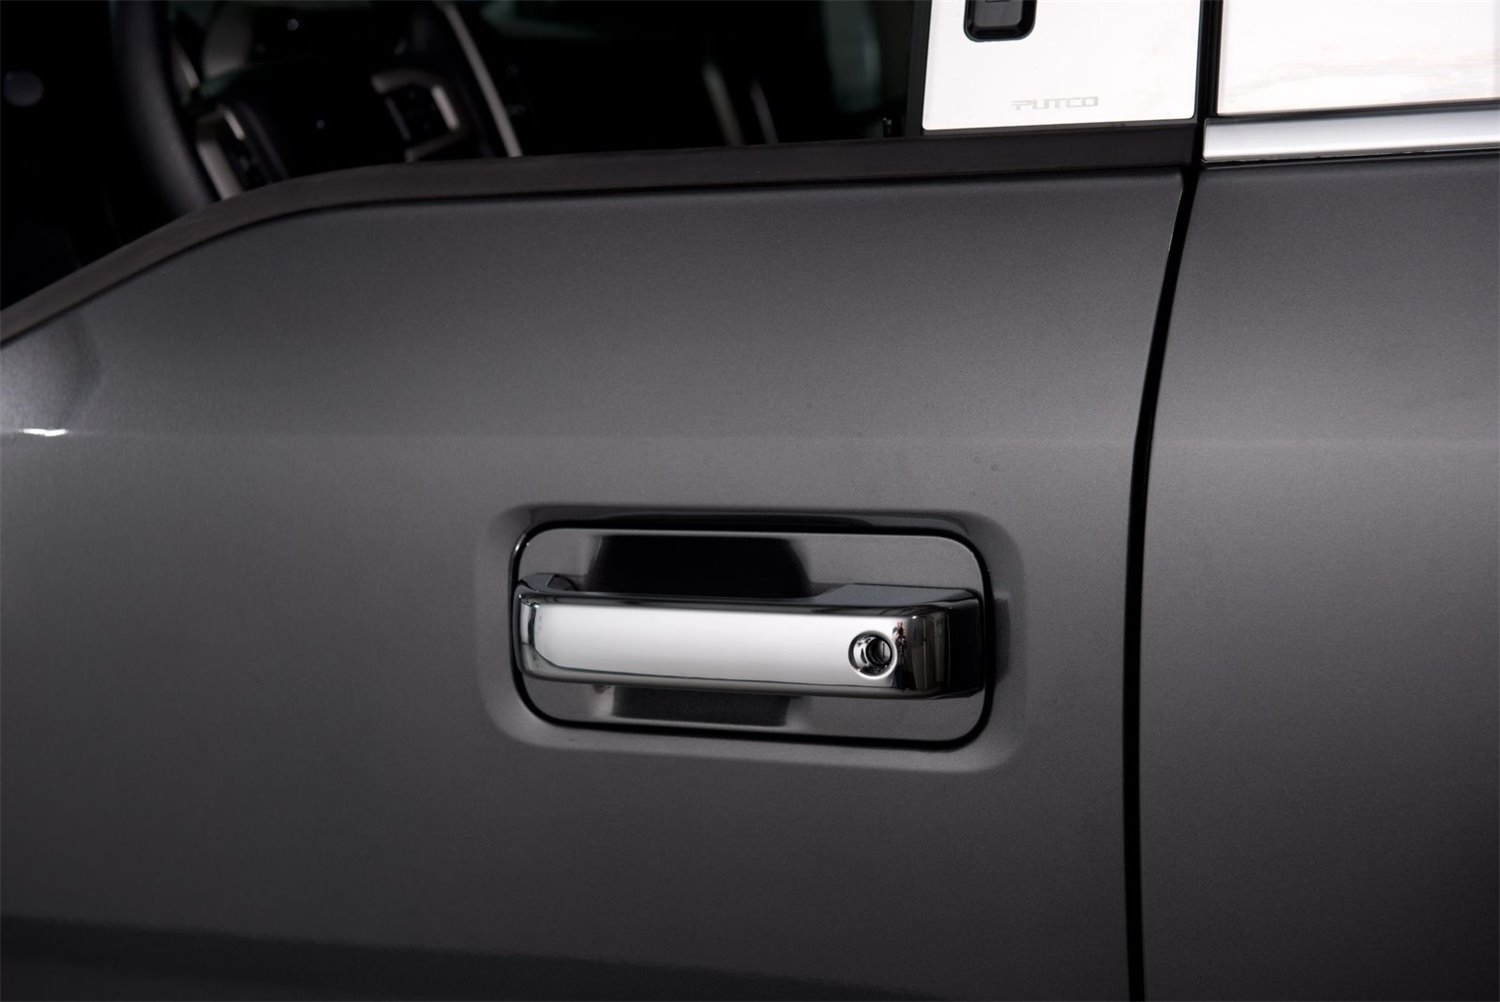 Chrome Trim Ford F150-4 Door w/ Driver Keyhole covers functional sensors